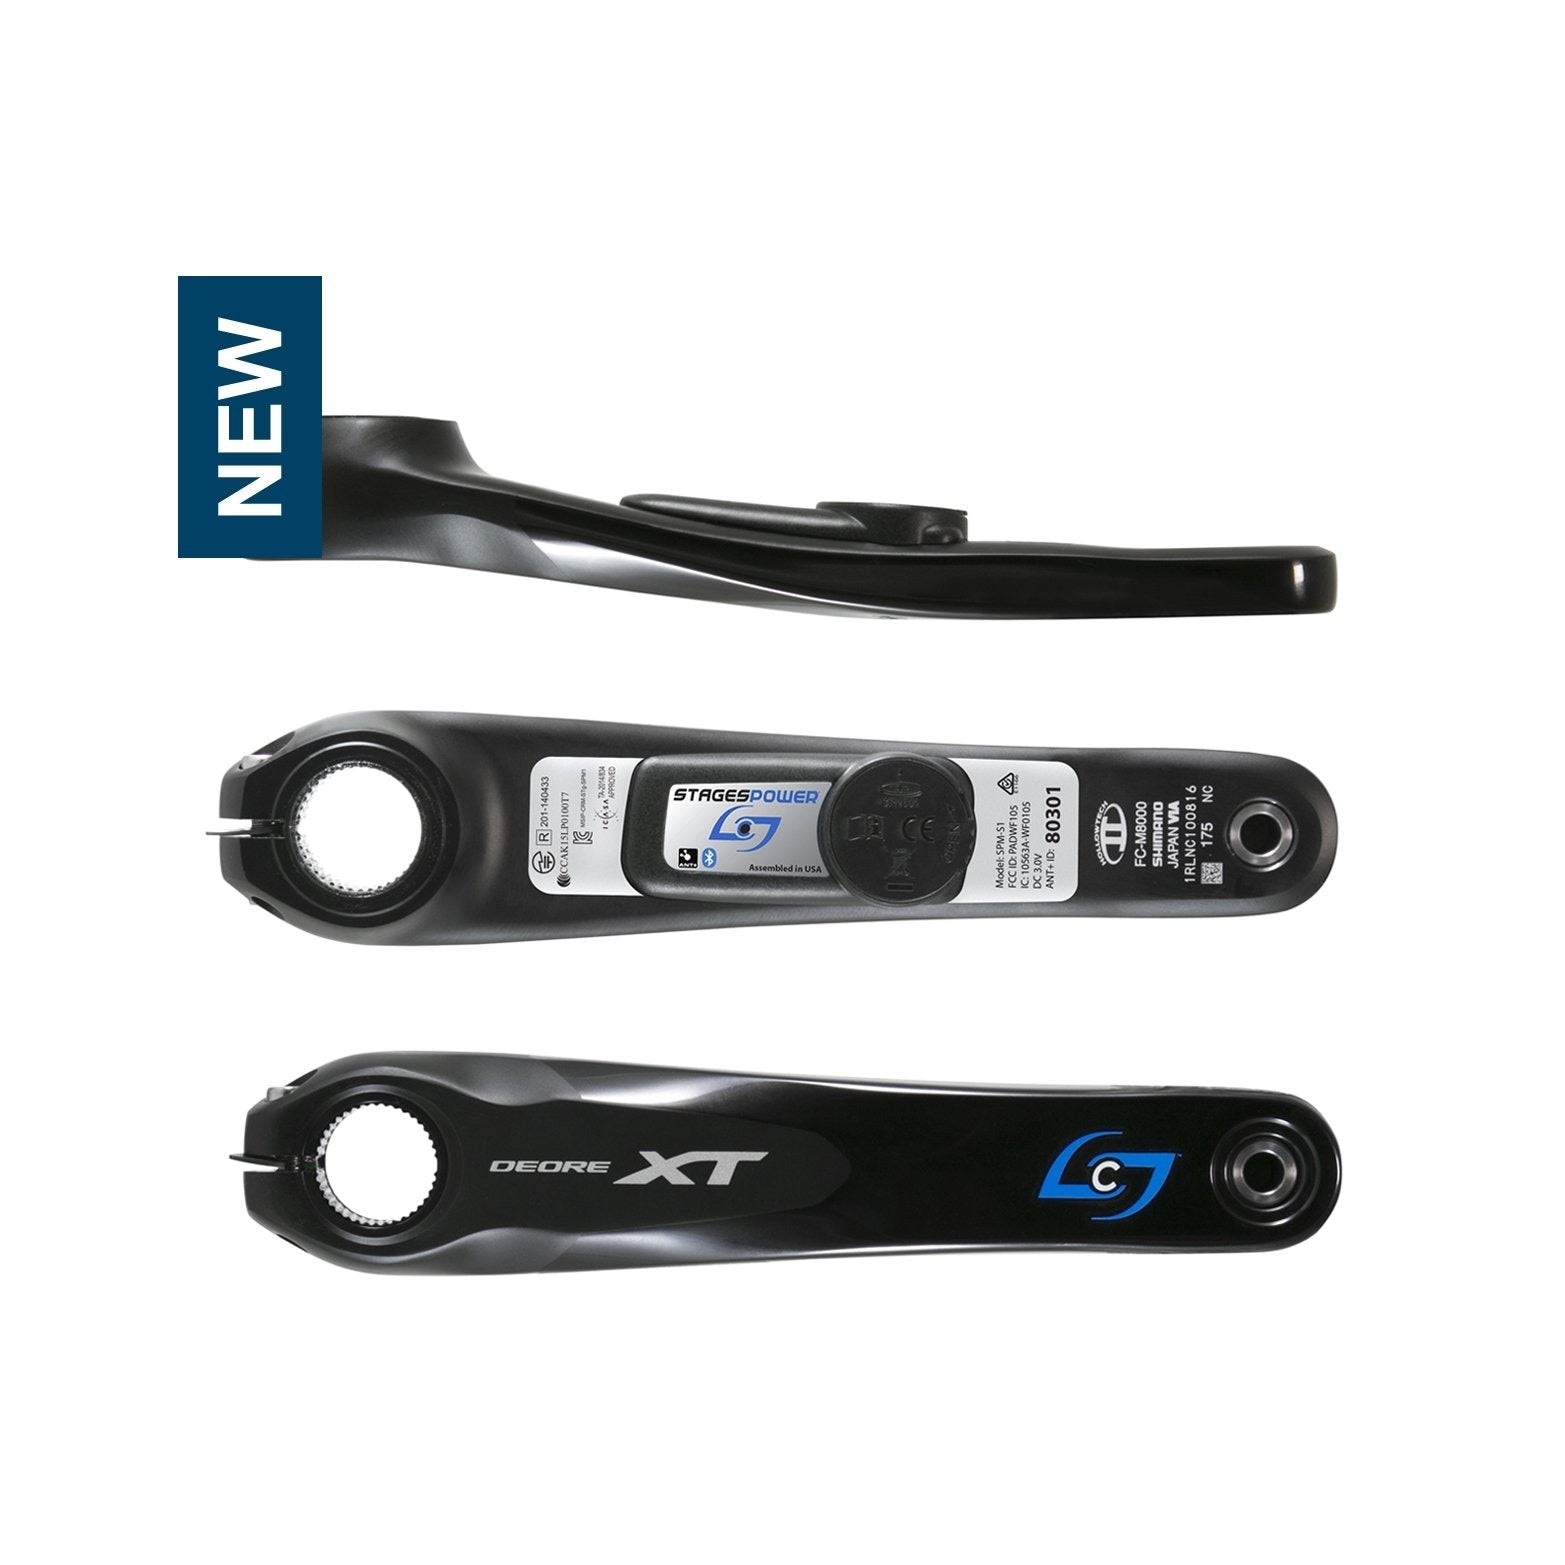 Stages Power L, Shimano XT M8100or M8120, Power Meter